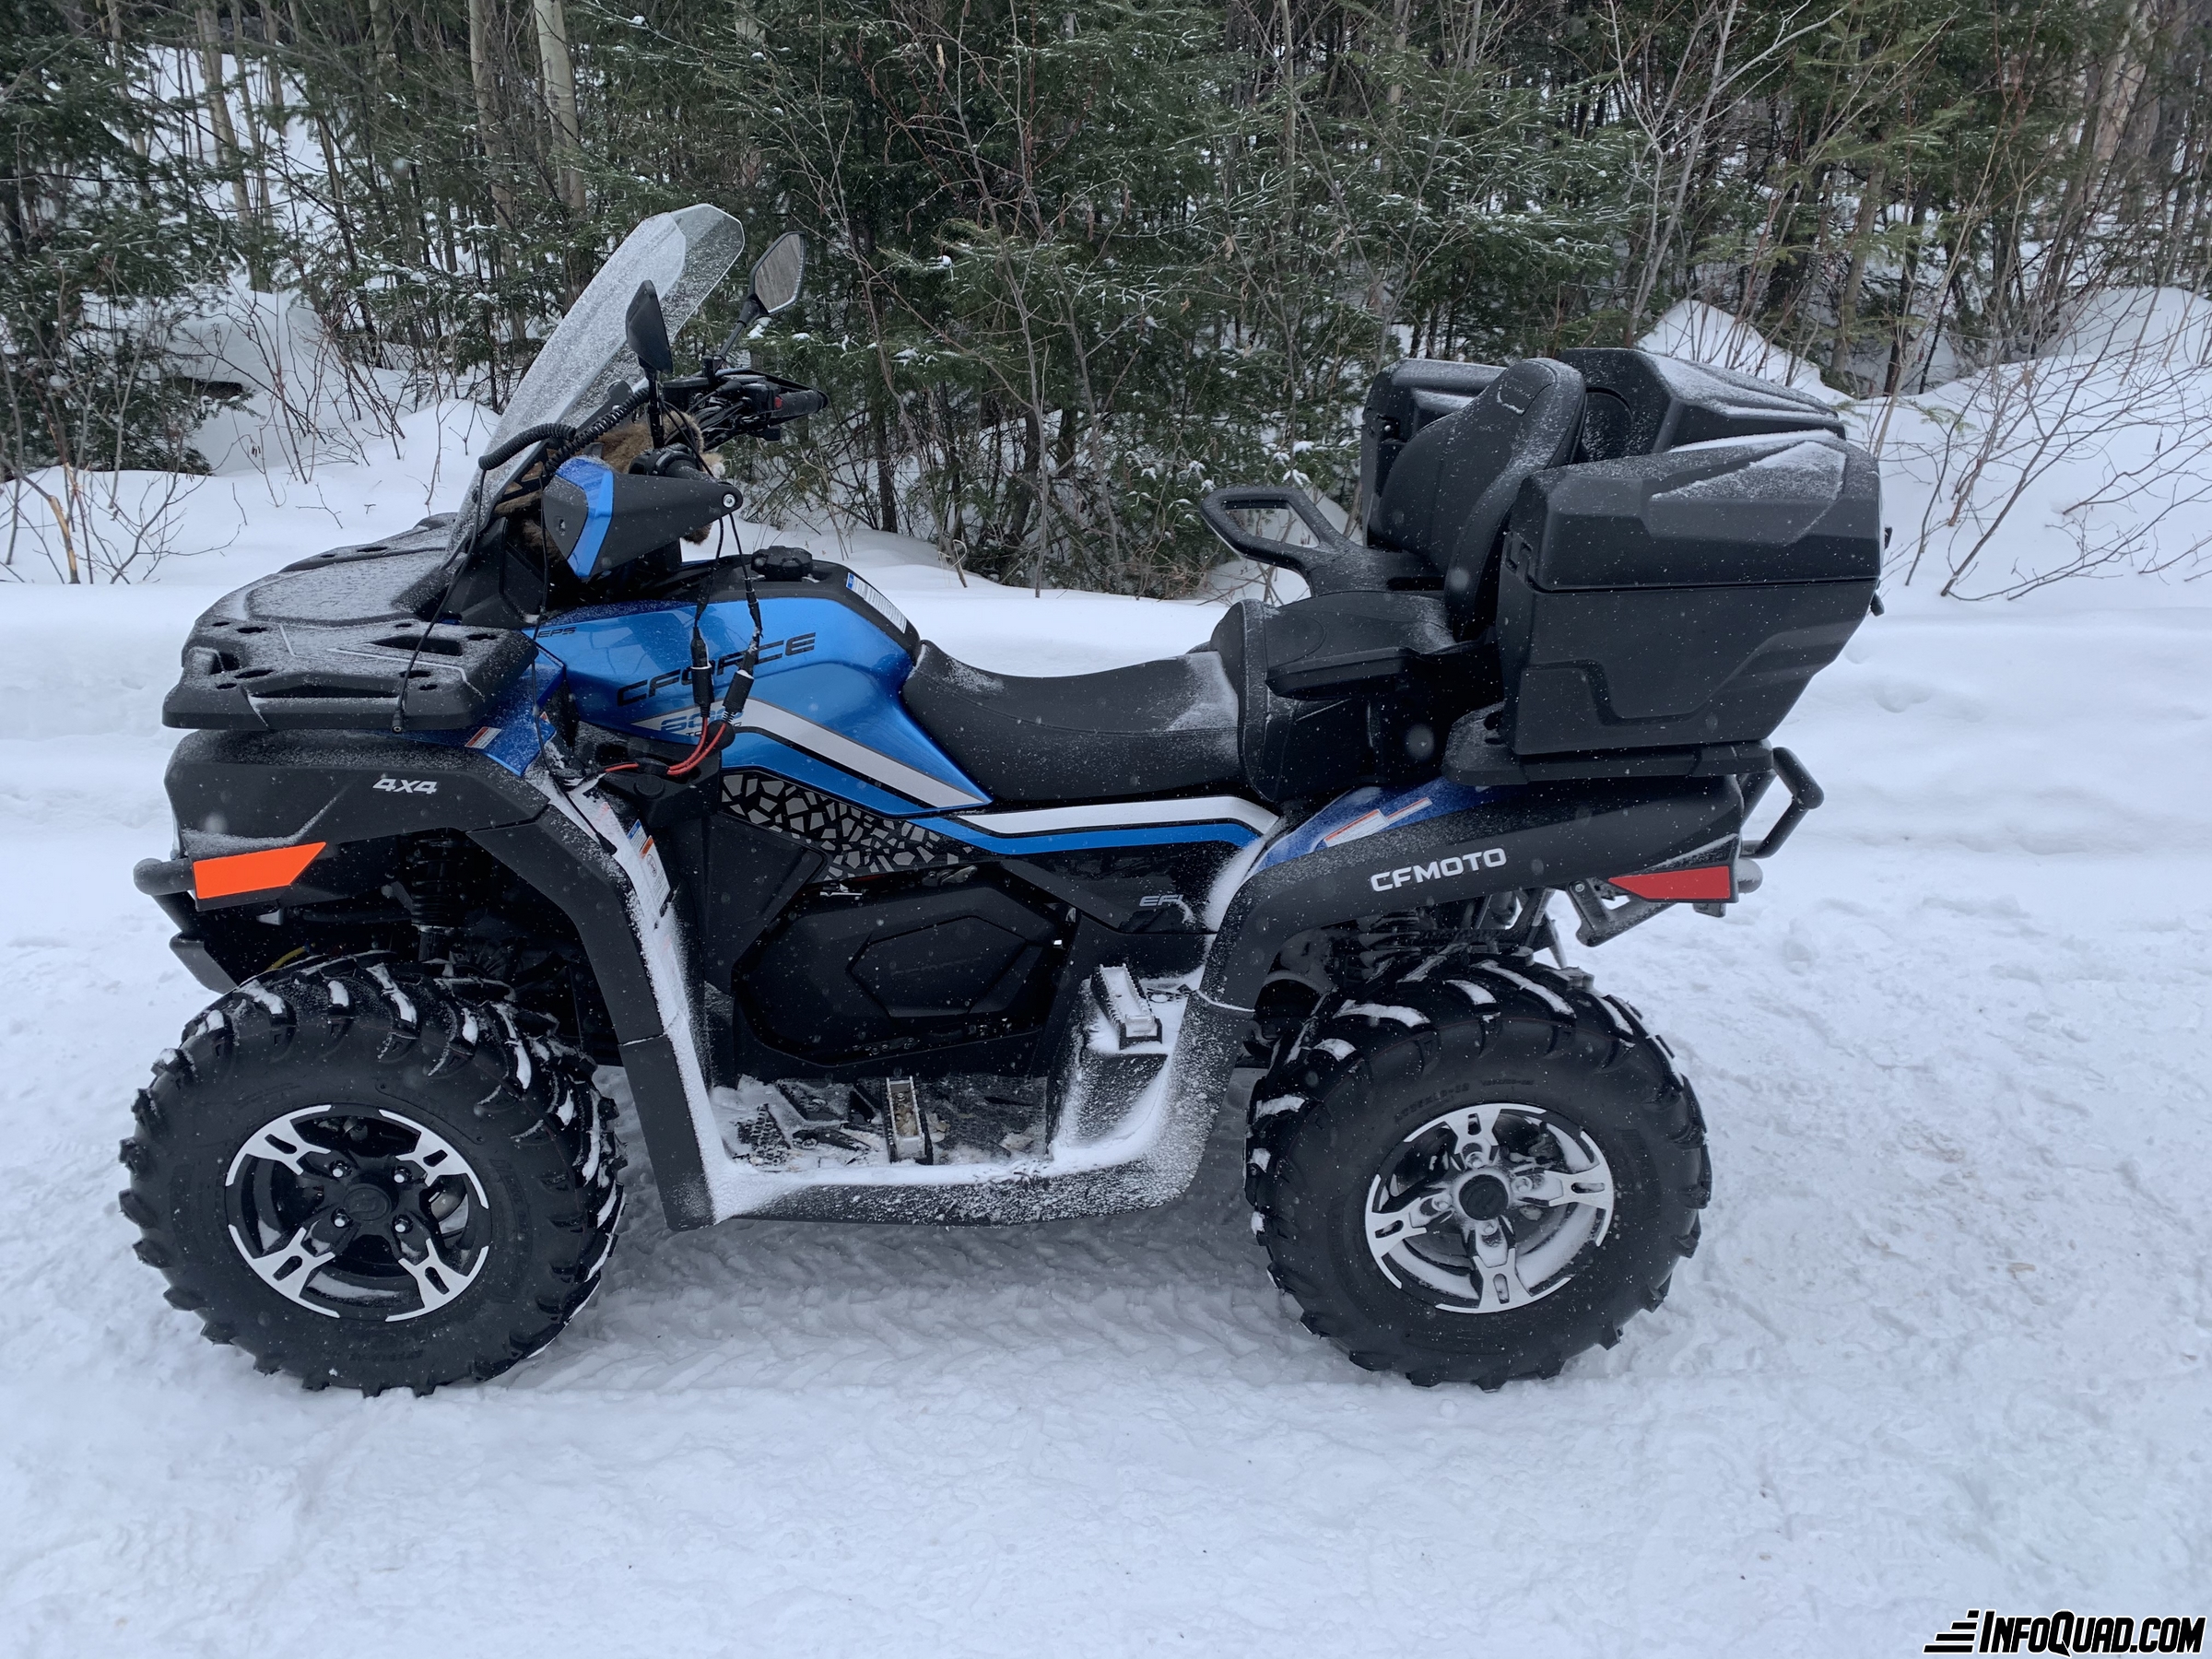 The 2021 Kawasaki Brute Force 750 - a great value